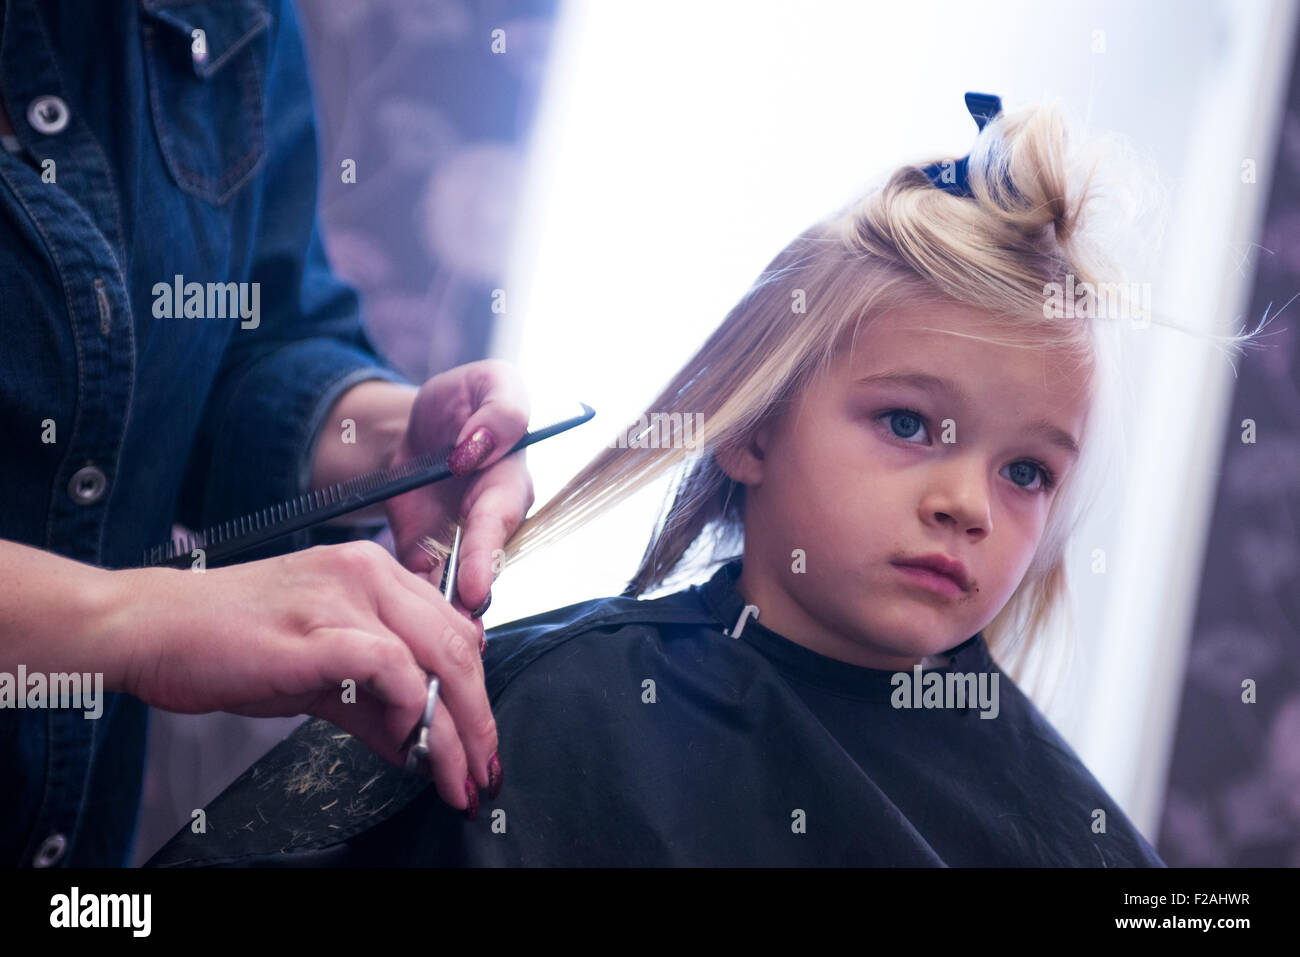 Female hairdresser cutting and brushing young child blond girl hair in hairdressing salon Stock Photo